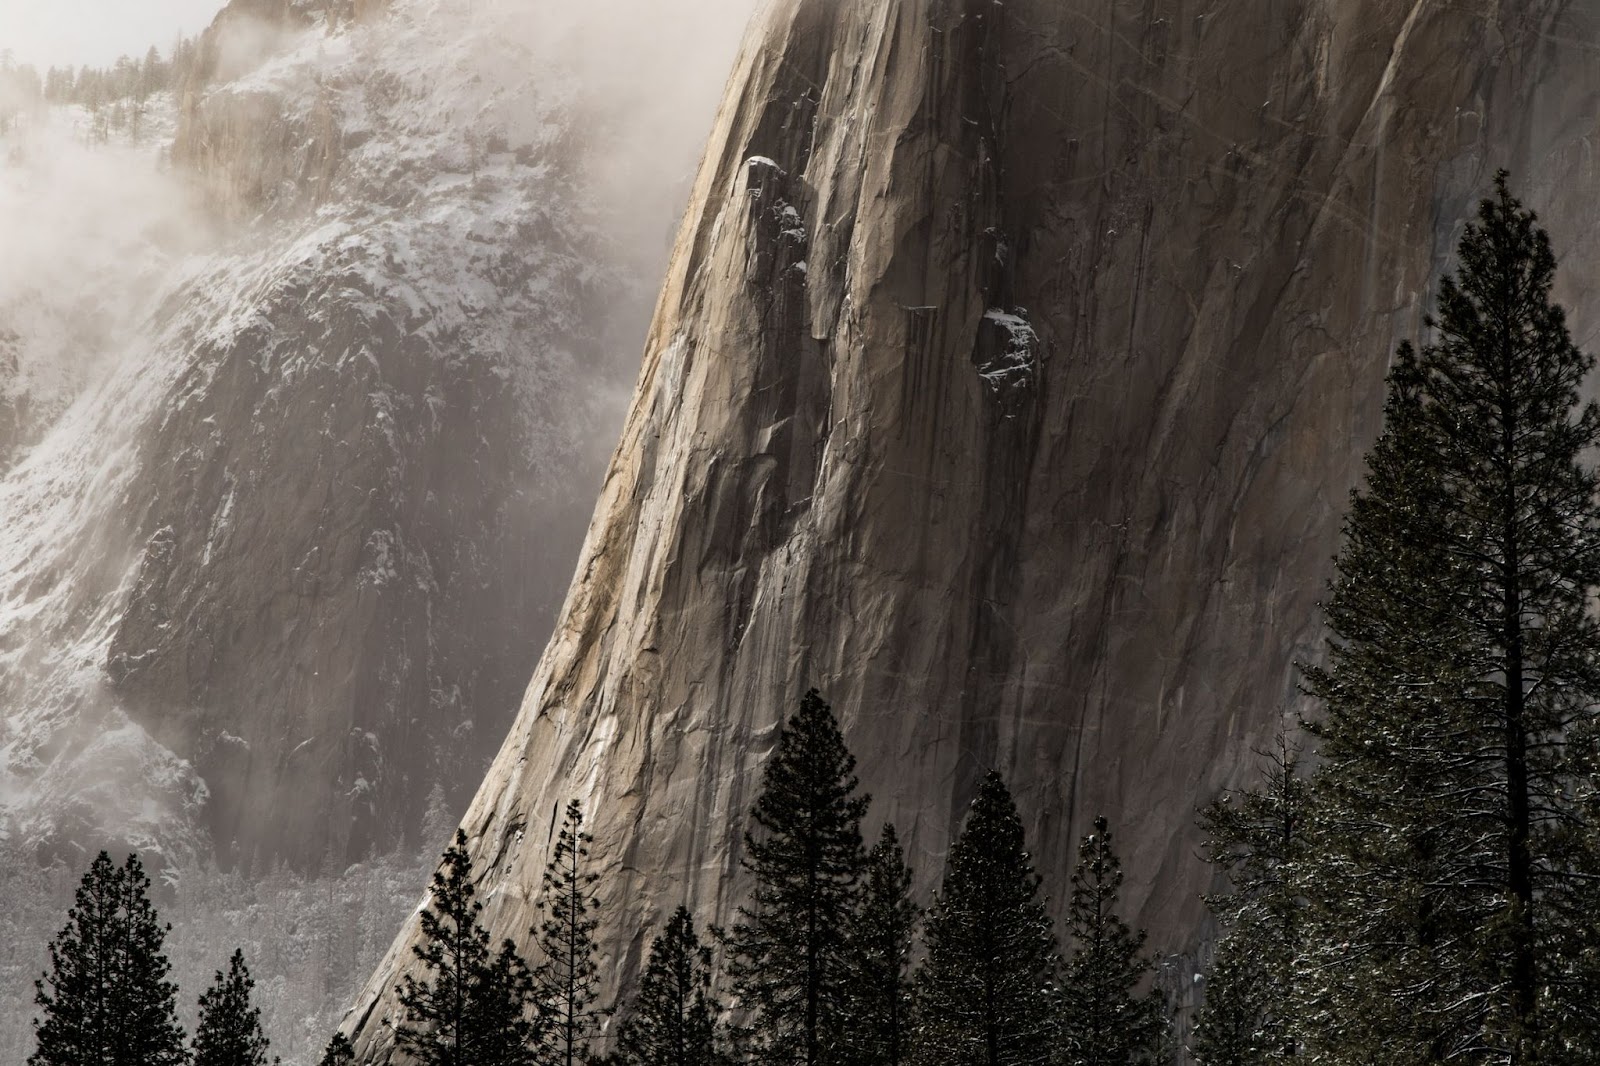 A landscape view of mountains in Yosemite